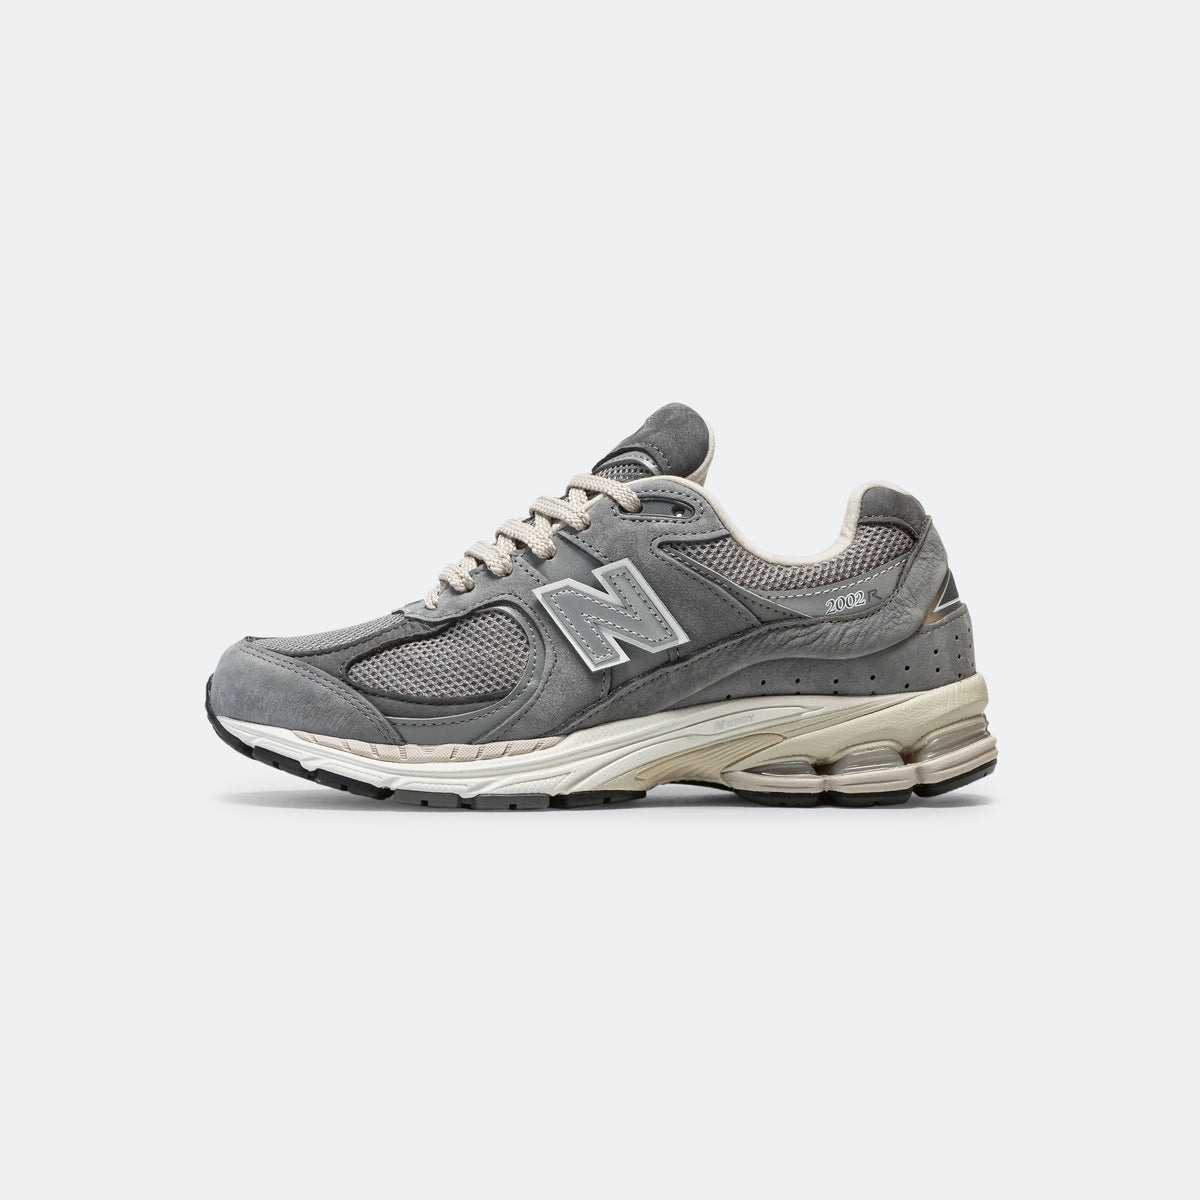 New Balance 2002R Shadow Grey/Castlerock – M2002RNM | UP THERE